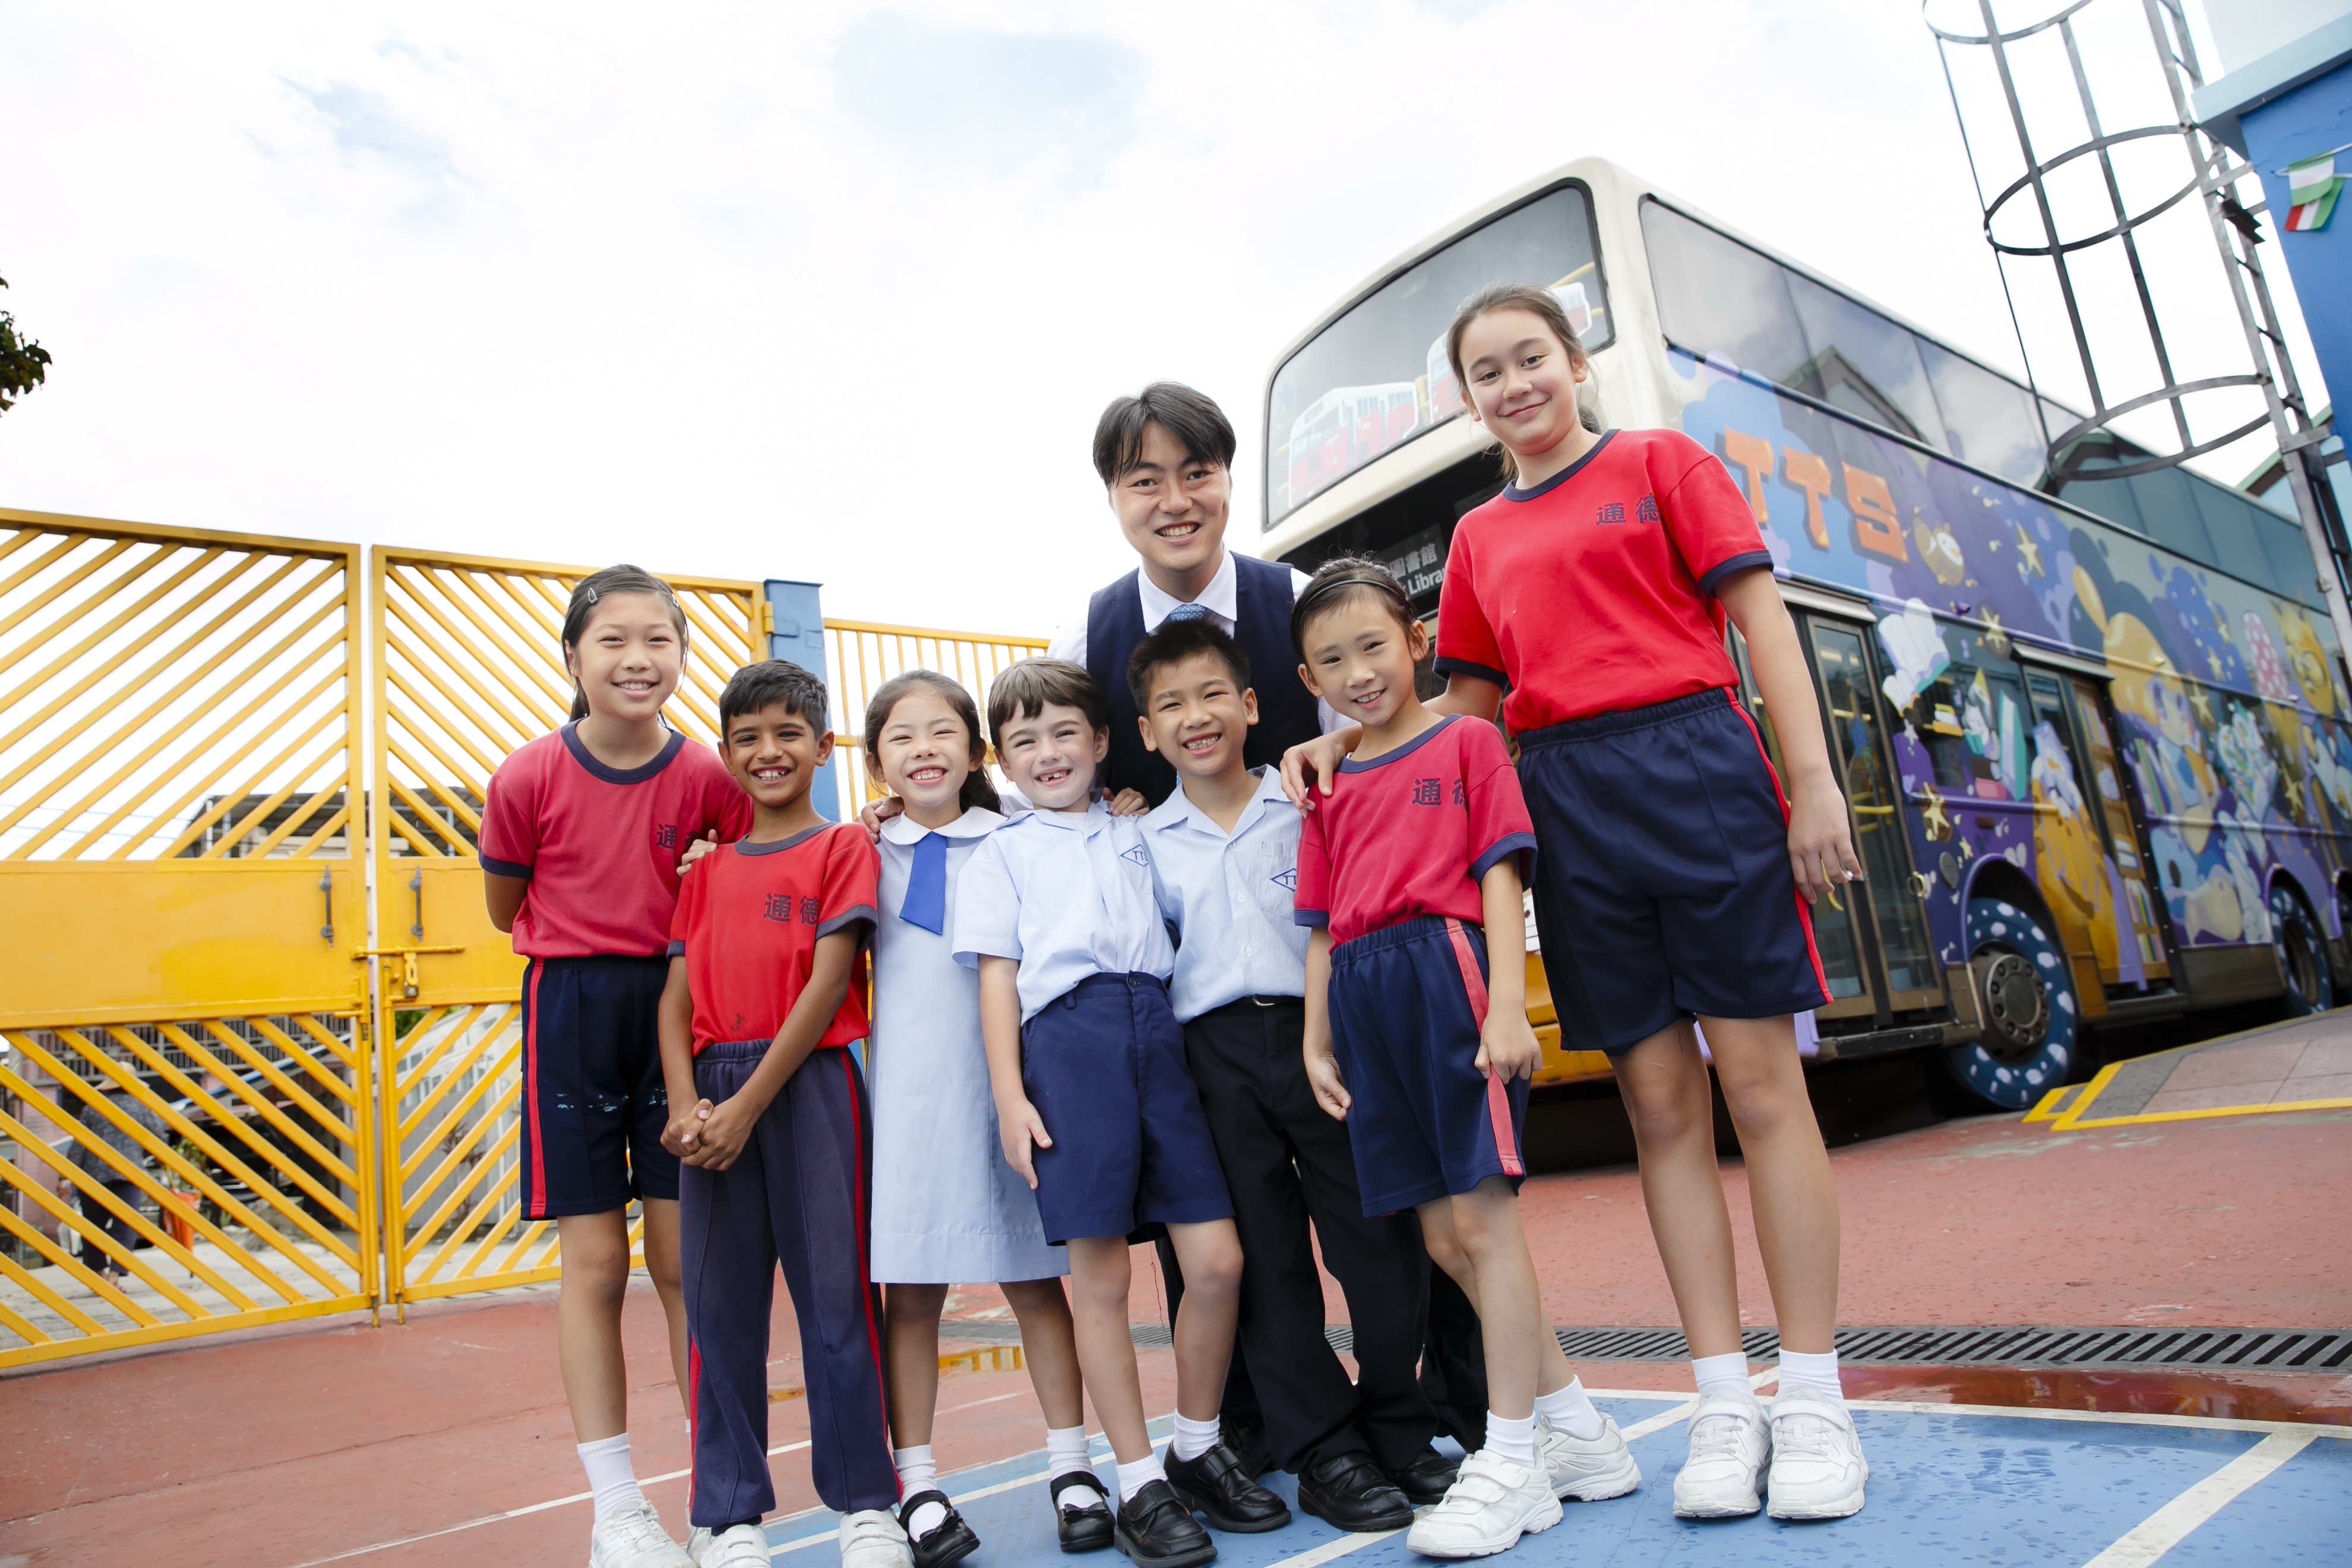 Principal Wong Wai-lap (back centre) with primary schoolchildren in front of their KMB bus library at Tung Tak School in Hong Kong’s New Territories. Photo: Raymond Mak